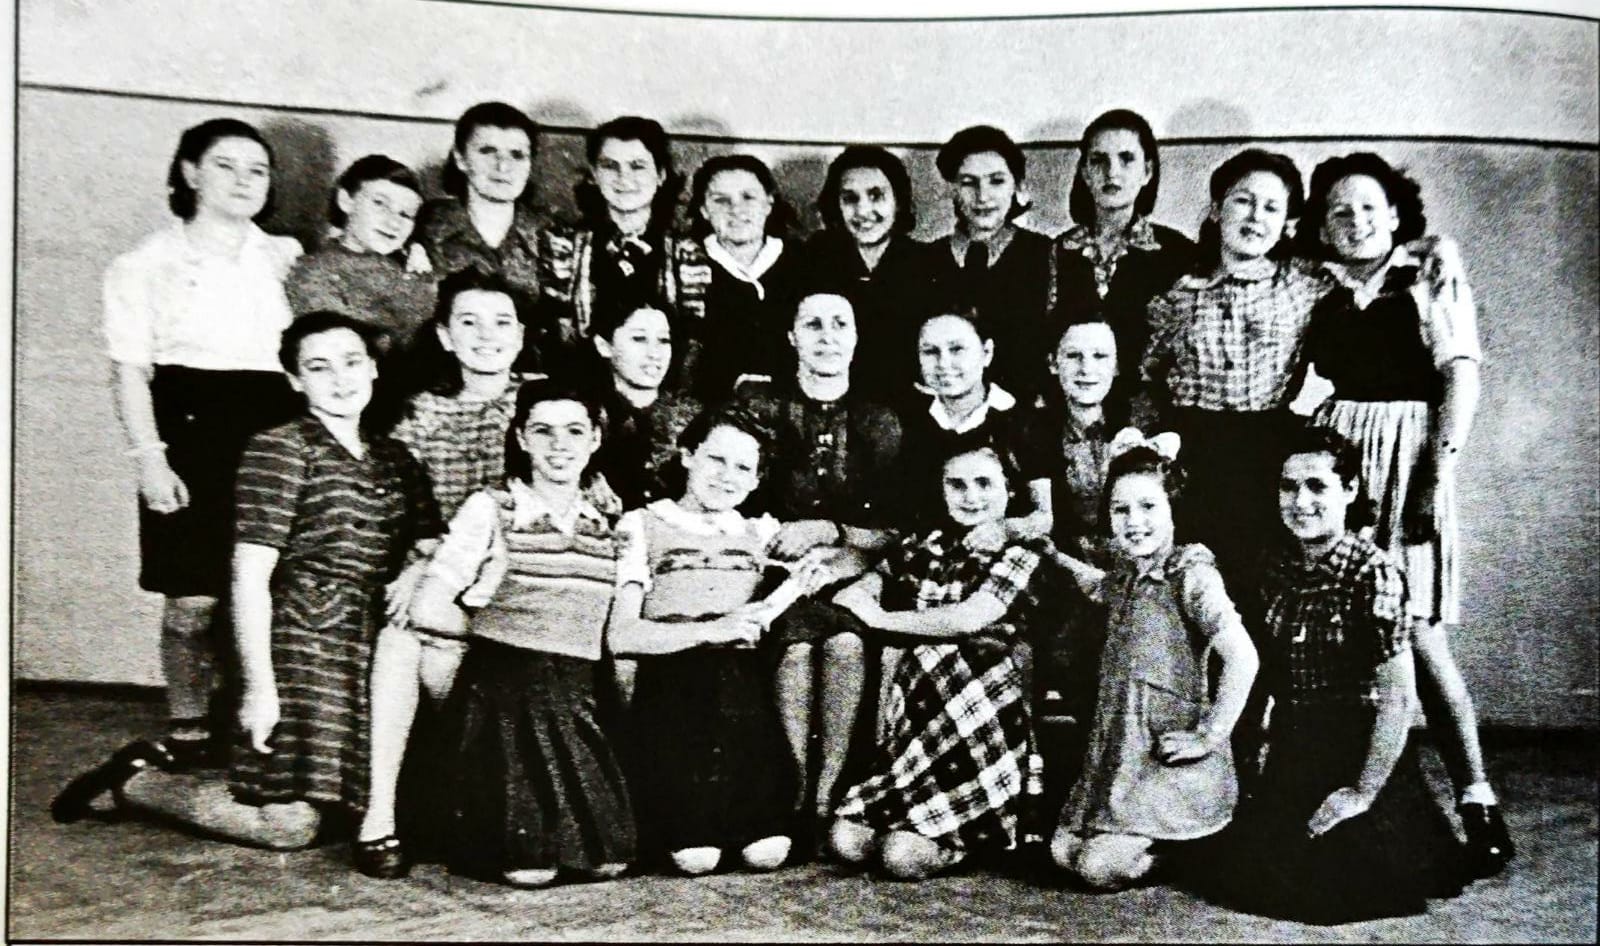 A group of Transnistrian orphans (December 1944). The orphans were moved from the ghettos and camps to Iași and from there to Bucharest (Romania). Unfortunately, this group was transferred by the Russians to Odessa where the conditions were extremely difficult. Part of this group managed to escape to Chernivtsi and from there to Bucharest.